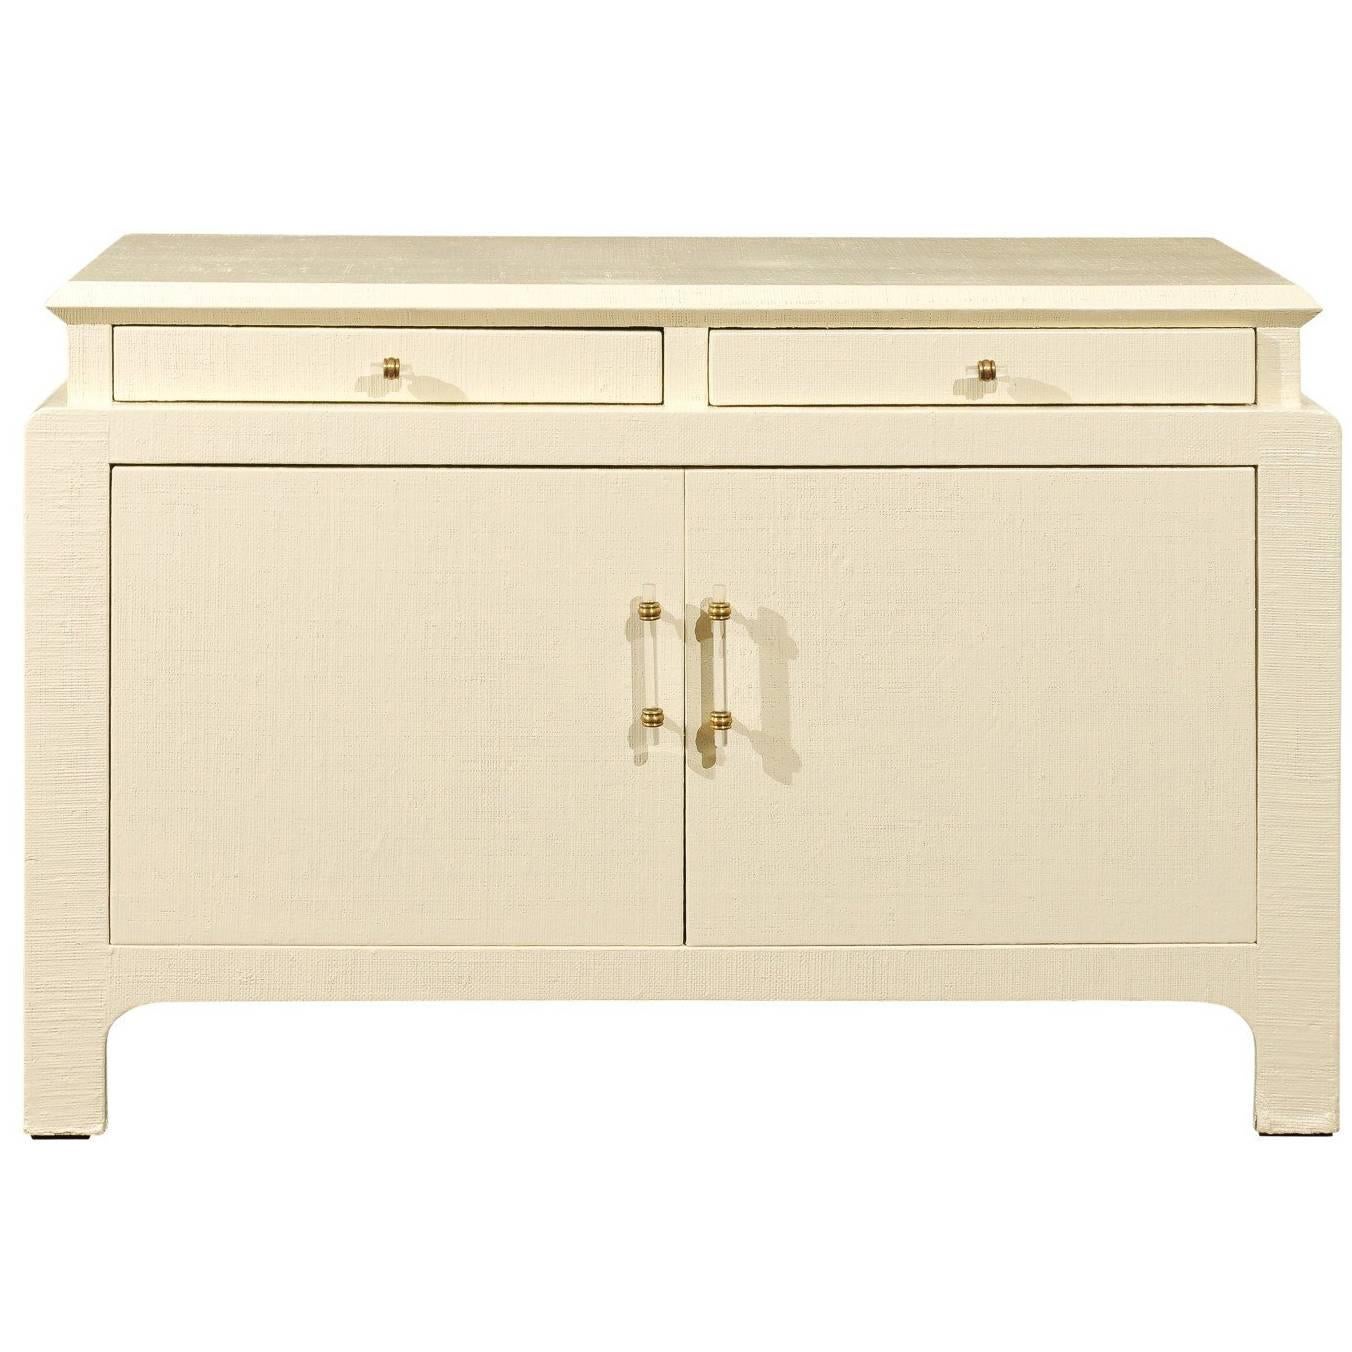 Gorgeous Restored Raffia Cabinet by Harrison-Van Horn in Cream Lacquer